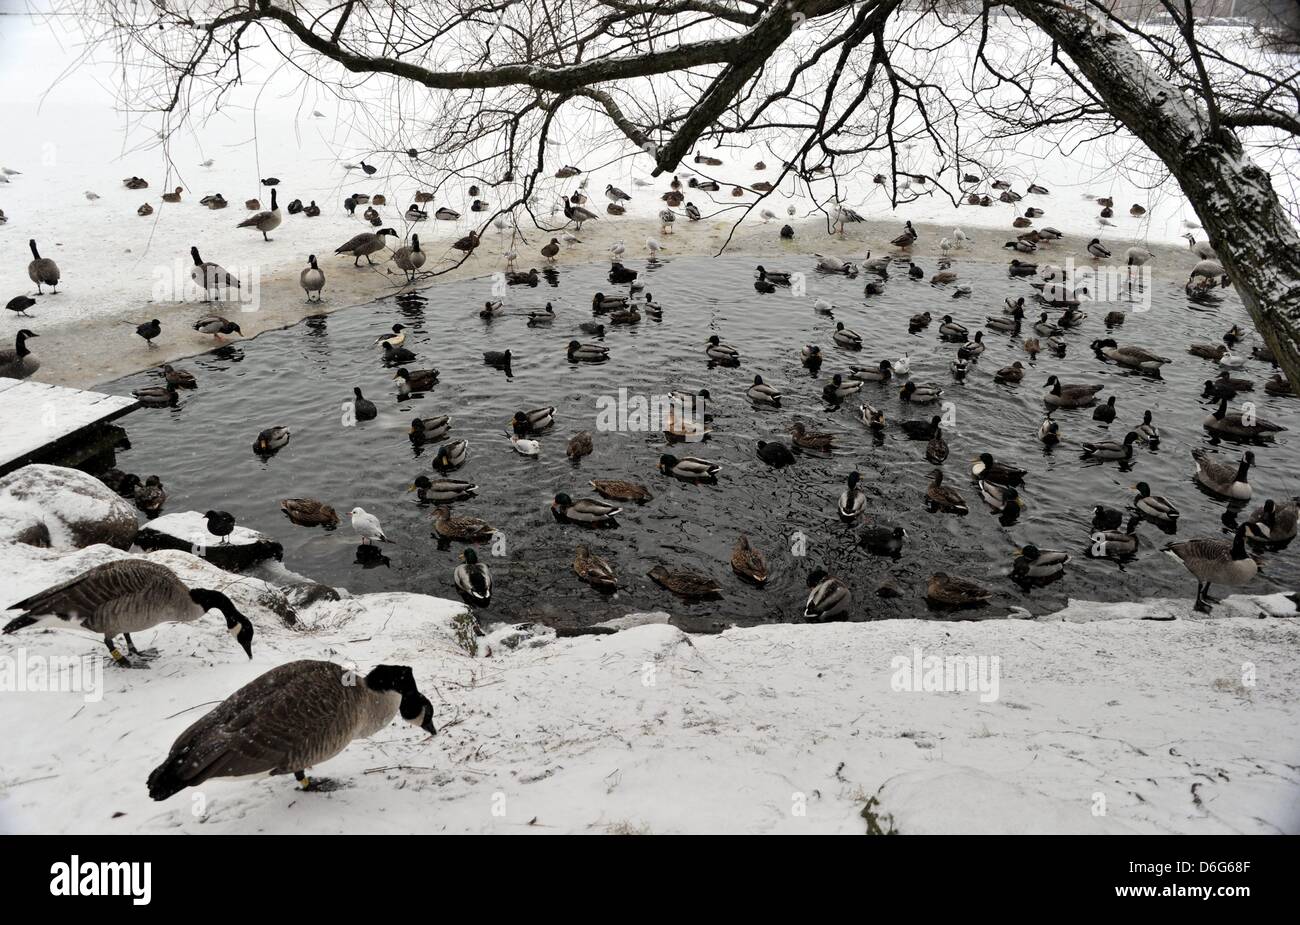 Geese, gulls, ducks and rails cluster around a patch of unfrozen water in Kiel, Germany, 10 February 2012. The long-lasting cold and snow is making it increasingly difficult for animals to find food. Photo: Carsten Rehder Stock Photo